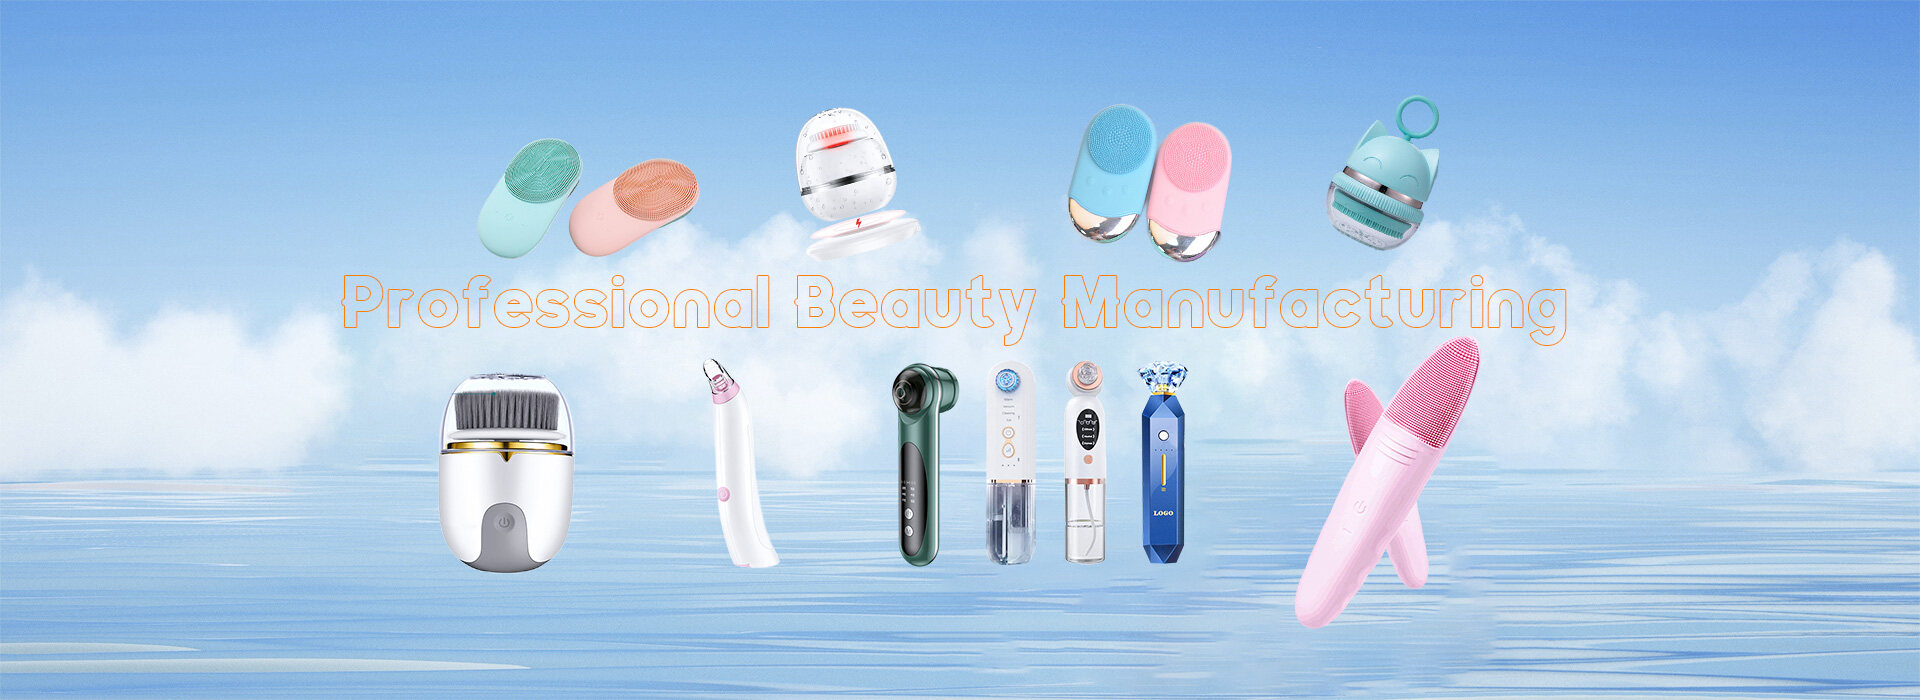 Portable Blackhead Vacuum Facial Blackhead Acne Remover Rechargeable Blackhead Remover Vacuum,2022 Pore Cleaner Vacuum Visual Deep Cleansing Rechargeable Blackhead Remover Beauty Machine Suction,New Arrival Skin Extractor Acne Pores Cleanser Facial Skin Cleaner Tool Electric Nose Cleaning Vacuum Blackhead Remover,Treatment Hair Removal Machine Skin Rejuvenation Equipment Sr Hr Machine Domestic Ipl Laser Permanent Home Waterproof Light Body,Portable Skin Peeling Machine Deep Cleansing Rechargeable Ion Professional Facial Ultrasonic Skin Scrubber